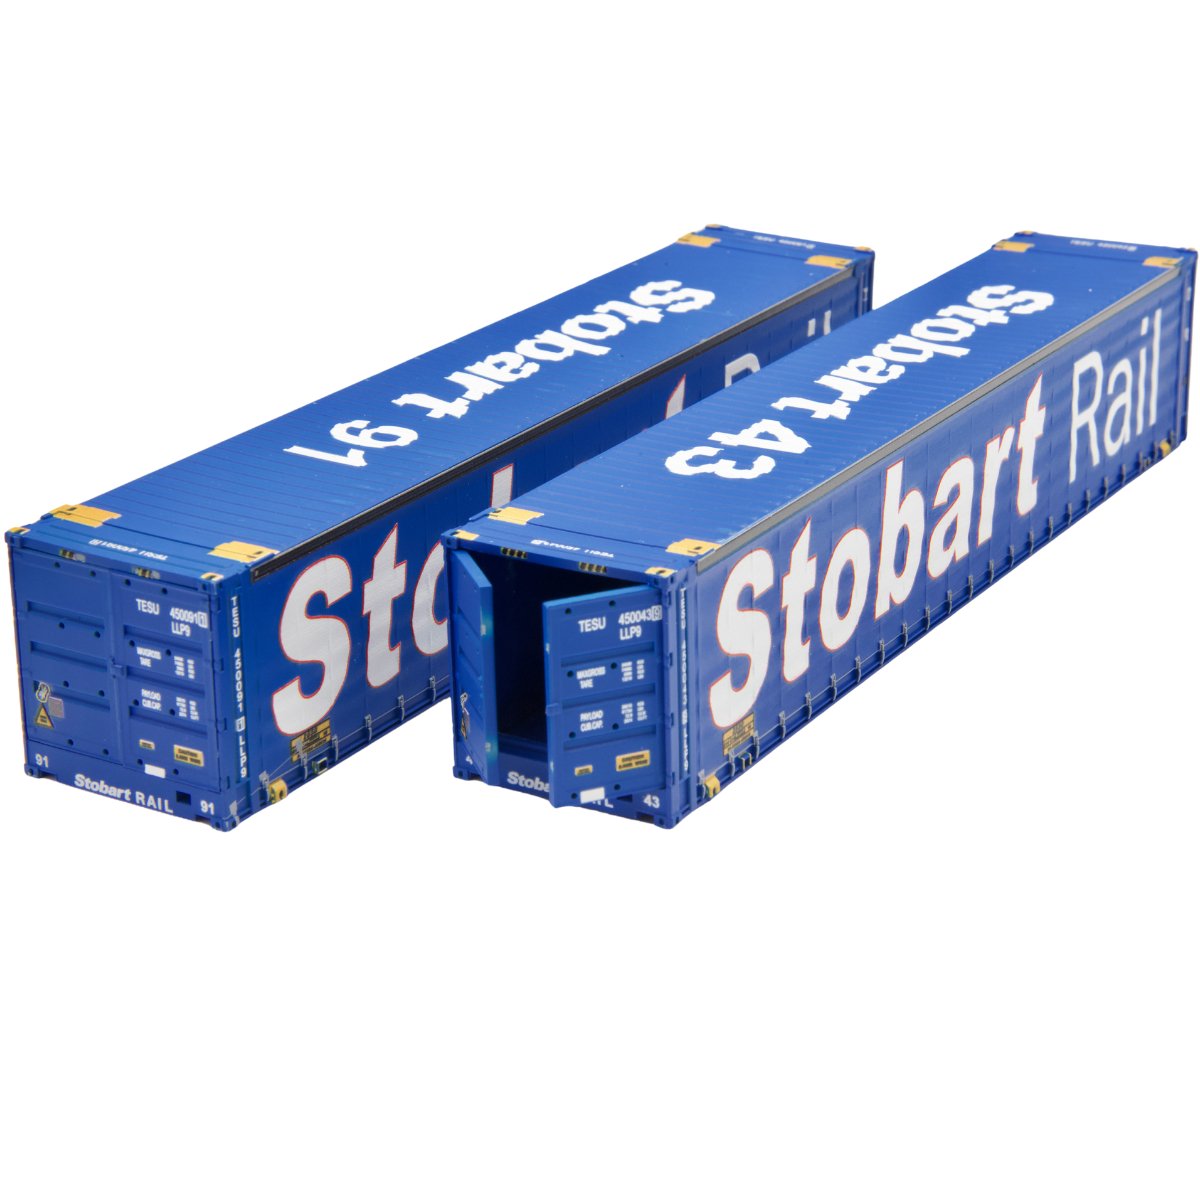 Dapol 4F - 028 - 154 45ft Curtain Container Set x2 Stobart Rail - OO Gauge - Phillips Hobbies